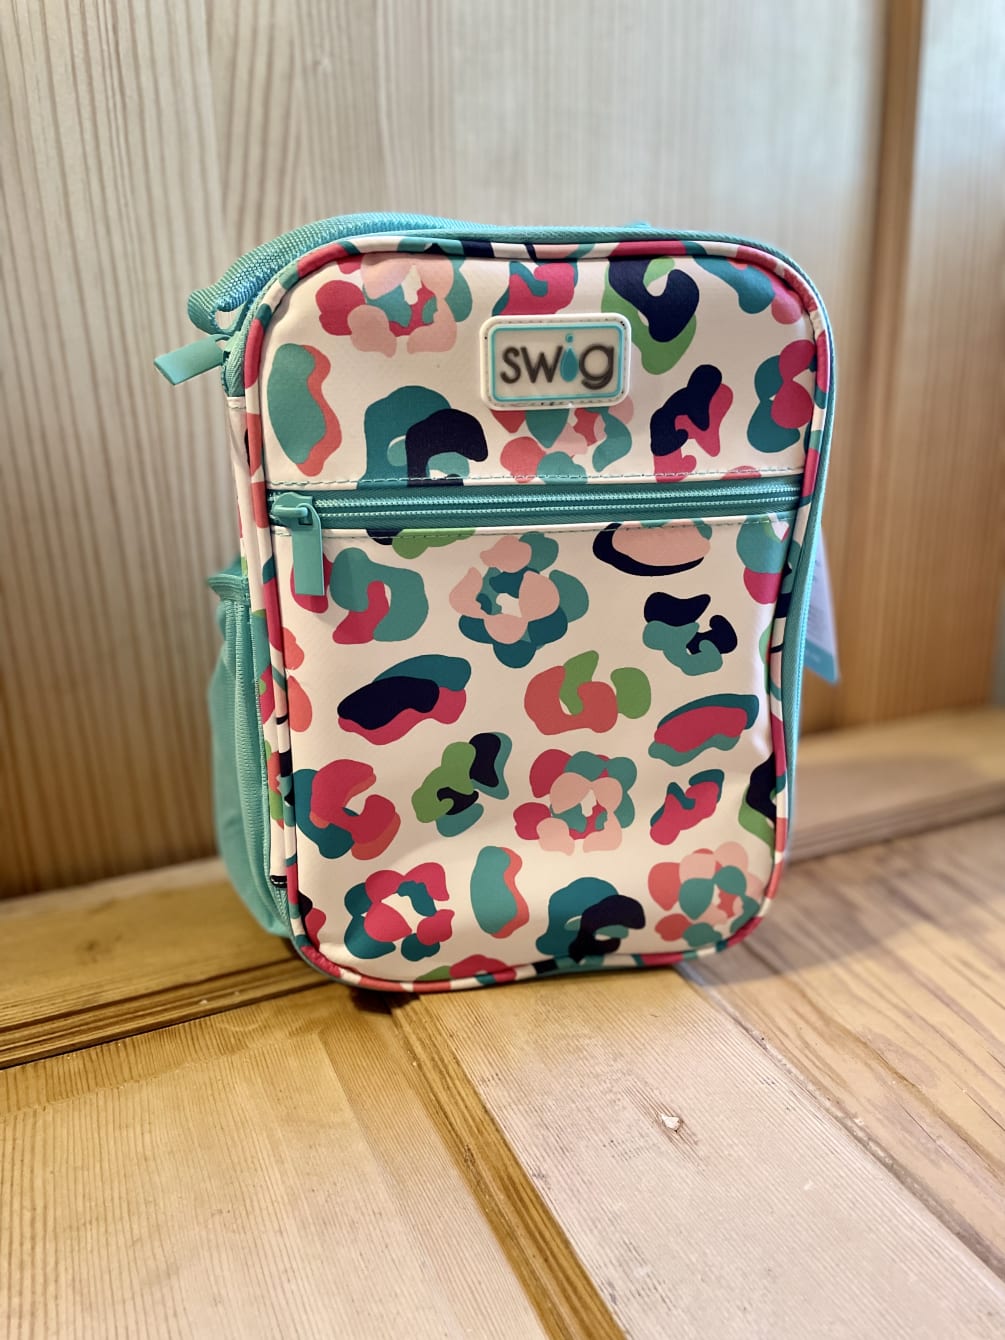 Lunch box includes removable insert with adjustable divider. Zip &amp; flip front